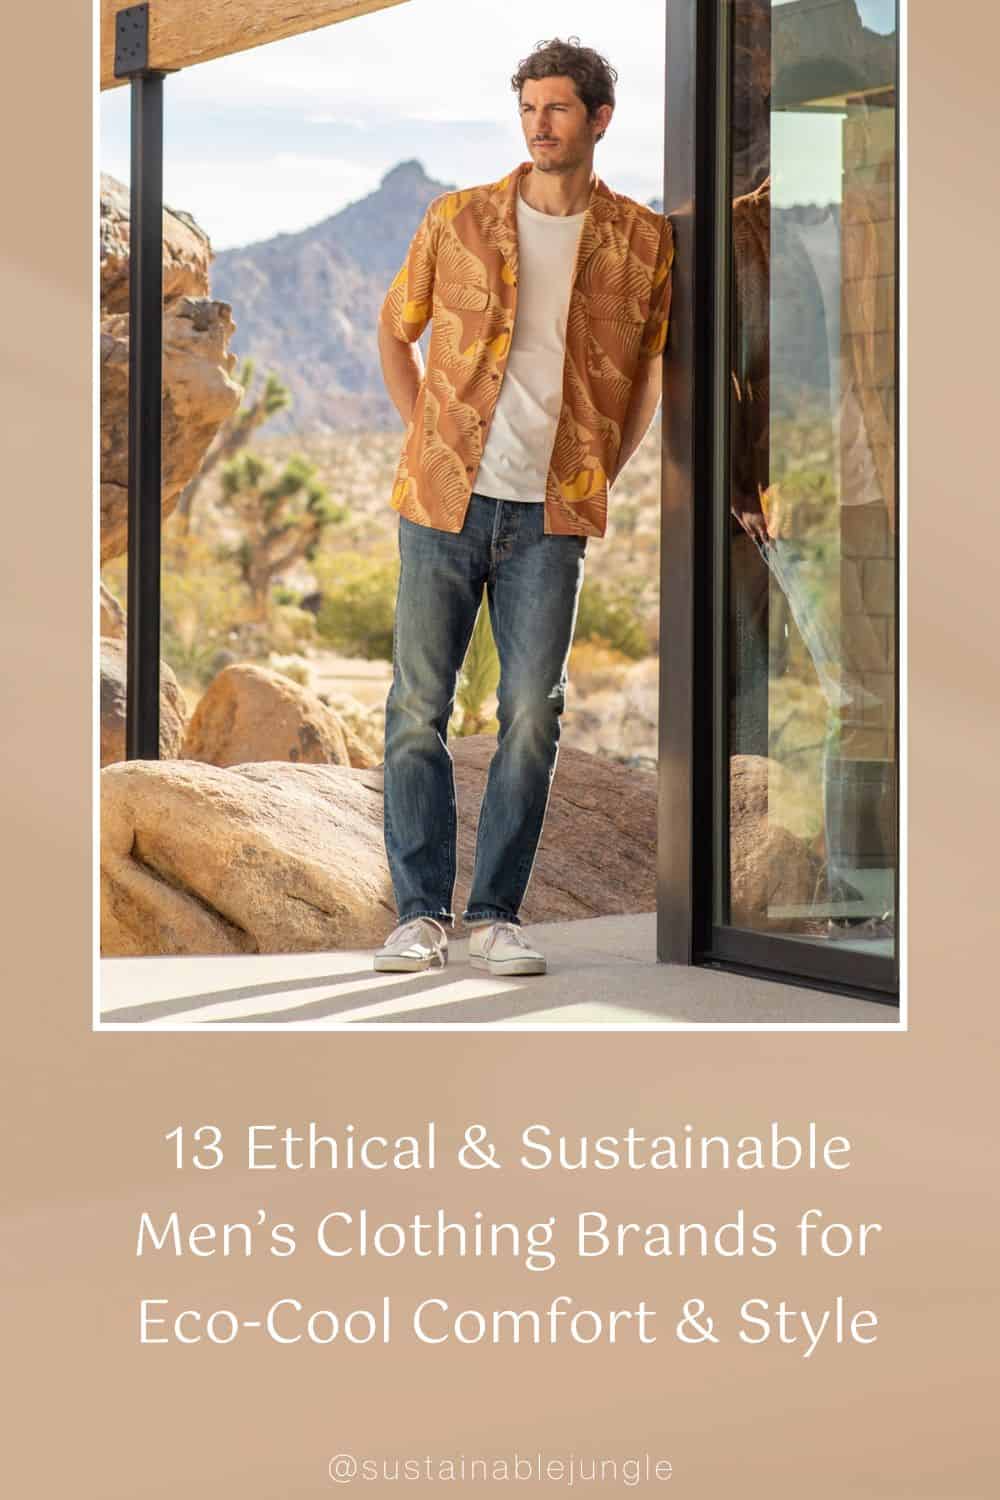 13 Ethical & Sustainable Men’s Clothing Brands for Eco-Cool Comfort & Style Image by Outerknown #sustainablemensclothing #sustainablemensclothingbrands #bestsustainablemensclothing #menssustainableclothing #ethicalmensclothing #ecofriendlymensclothing #sustainablejungle